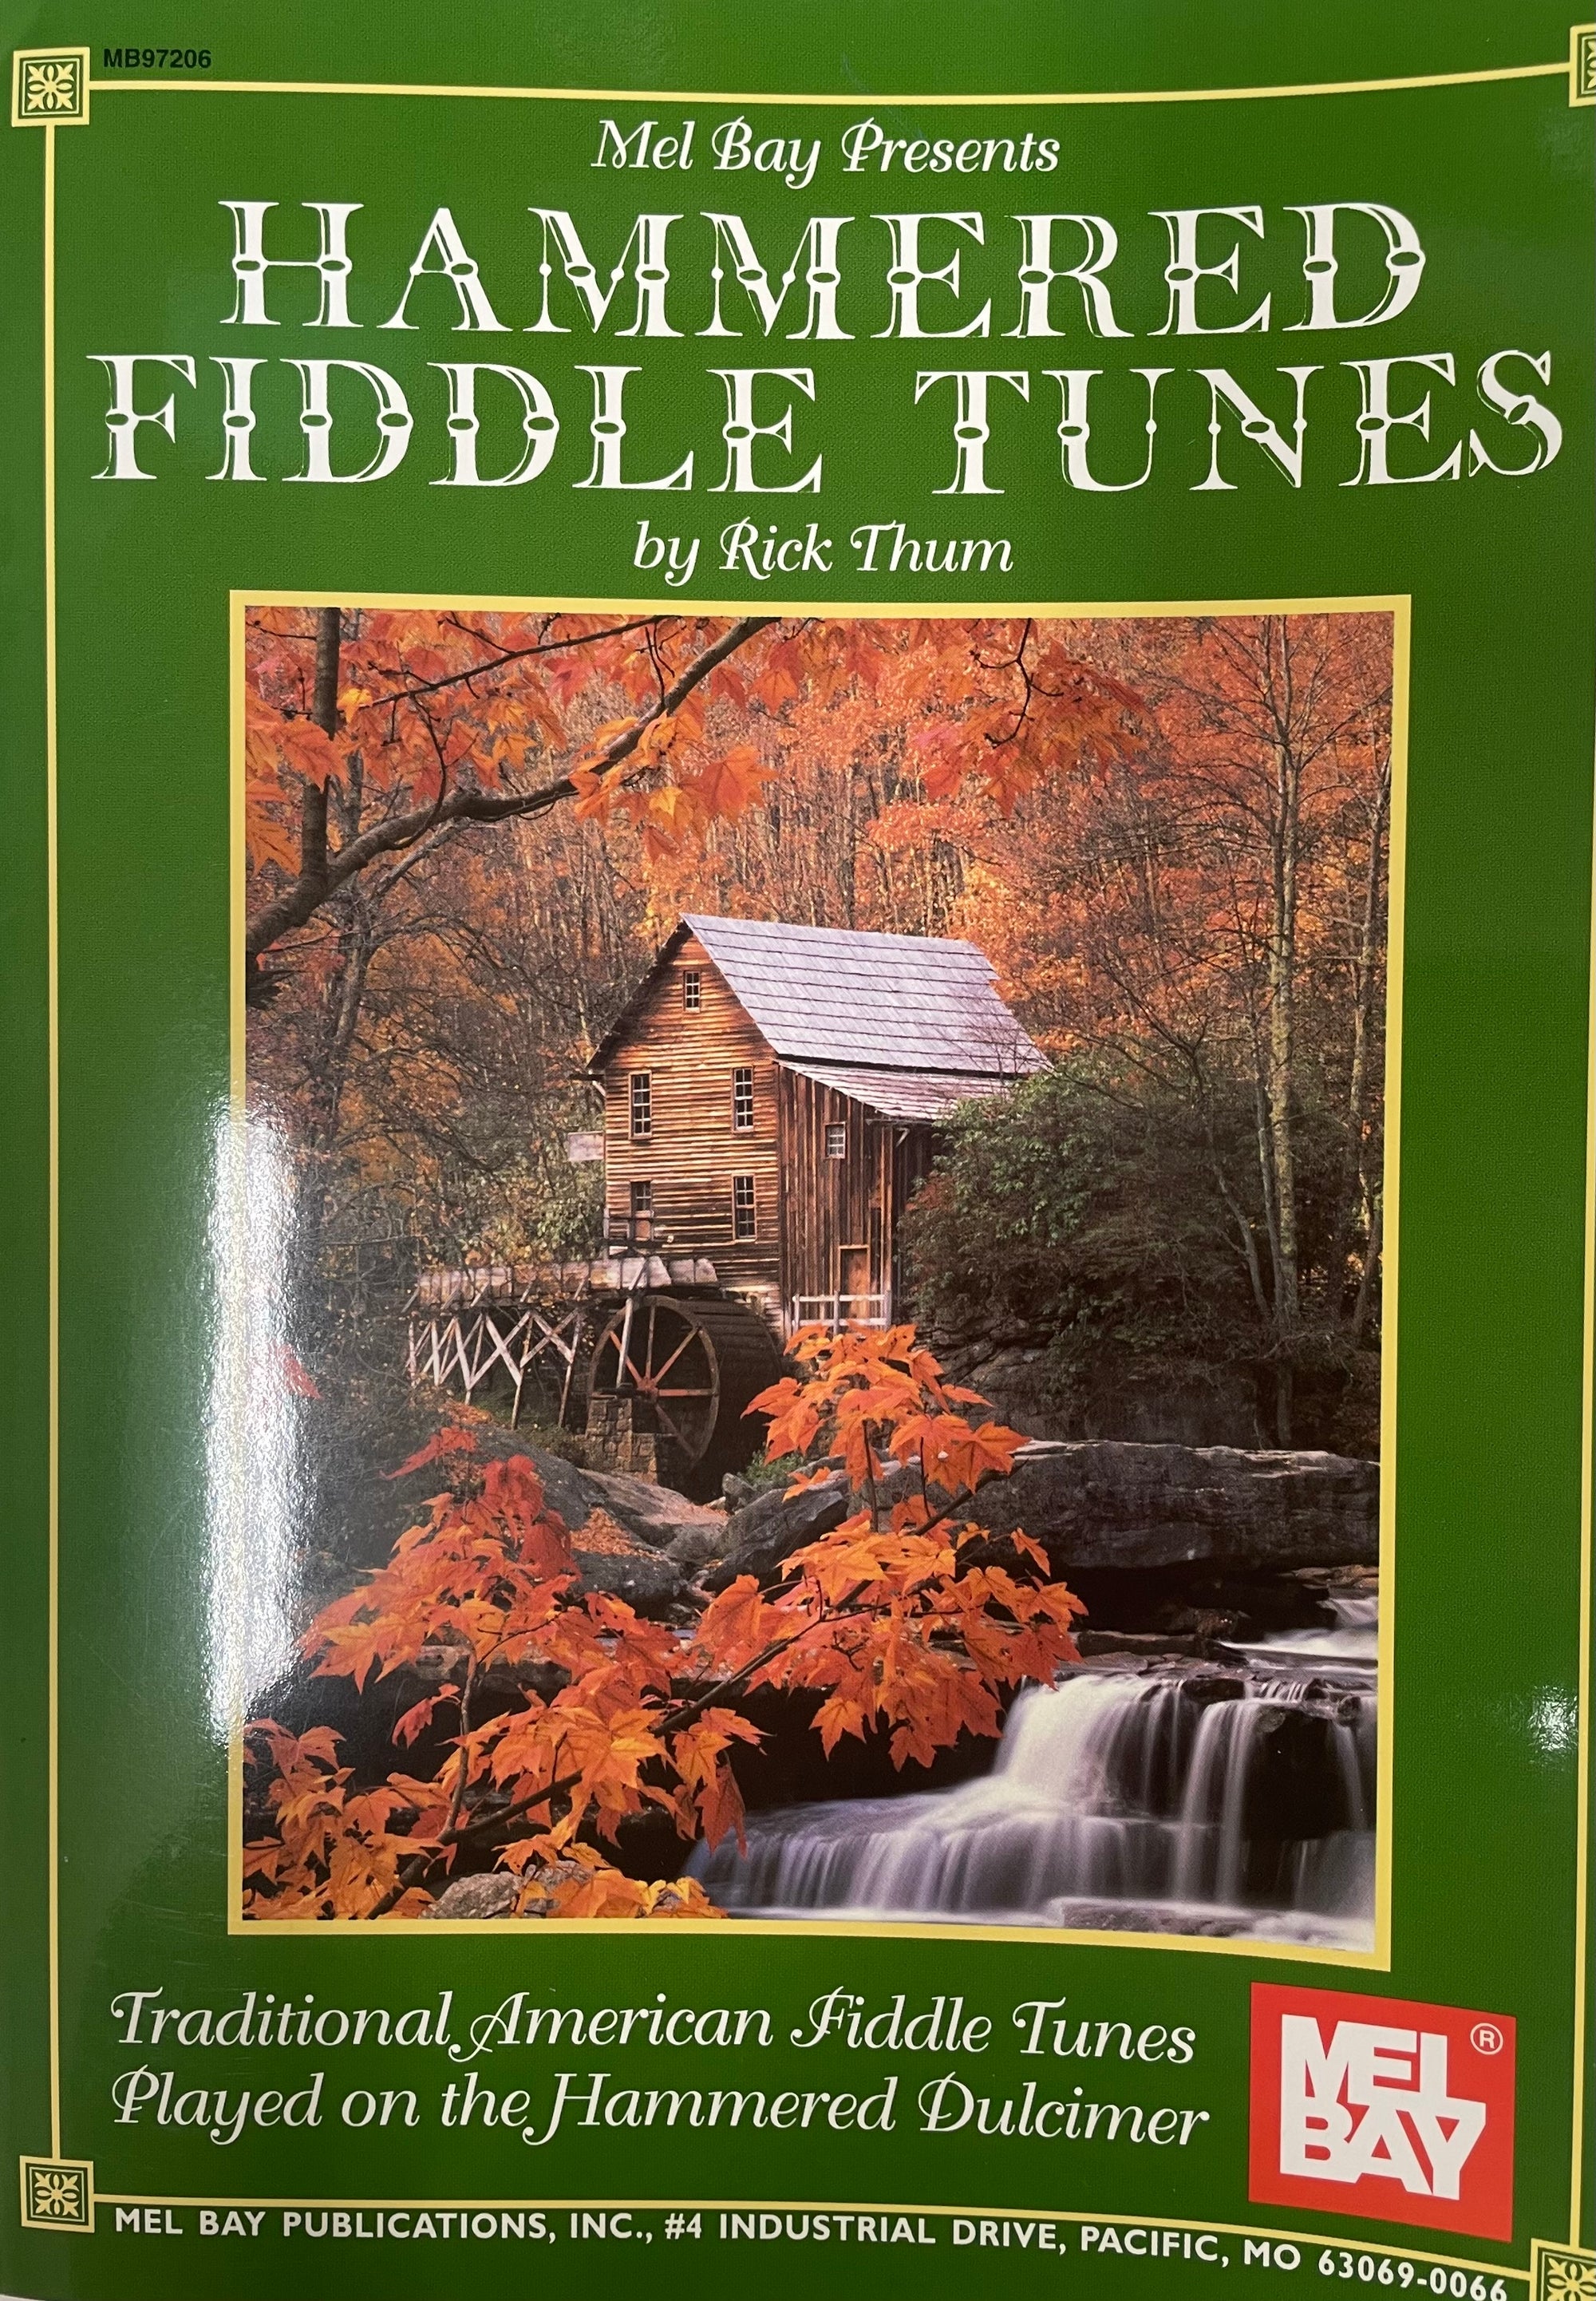 A book cover titled "Hammered Fiddle Tunes by Rick Thum," featuring an autumnal scene with a wooden mill house by a waterfall. Subtitle: "Traditional American Fiddle Tunes Played on the Hammered Dulcimer." The cover beautifully captures the essence of traditional American fiddle tunes and the hammered dulcimer.